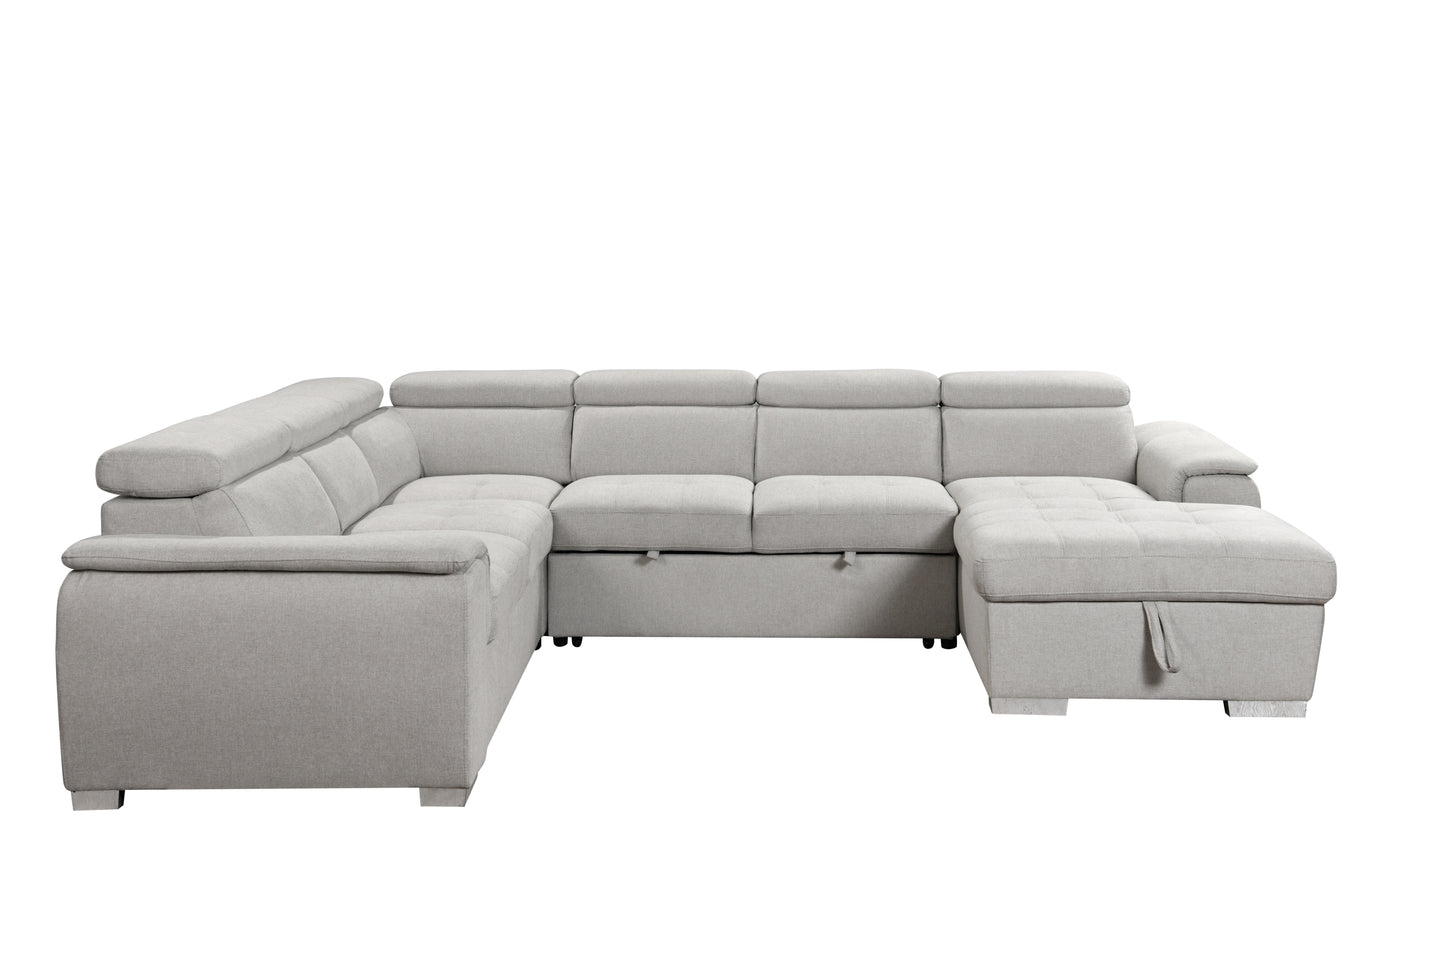 Modern U Shaped 7-seat Sectional Sofa Couch with Adjustable Headrest, Sofa Bed with Storage Chaise-Pull Out Couch Bed for Living Room ,Beige